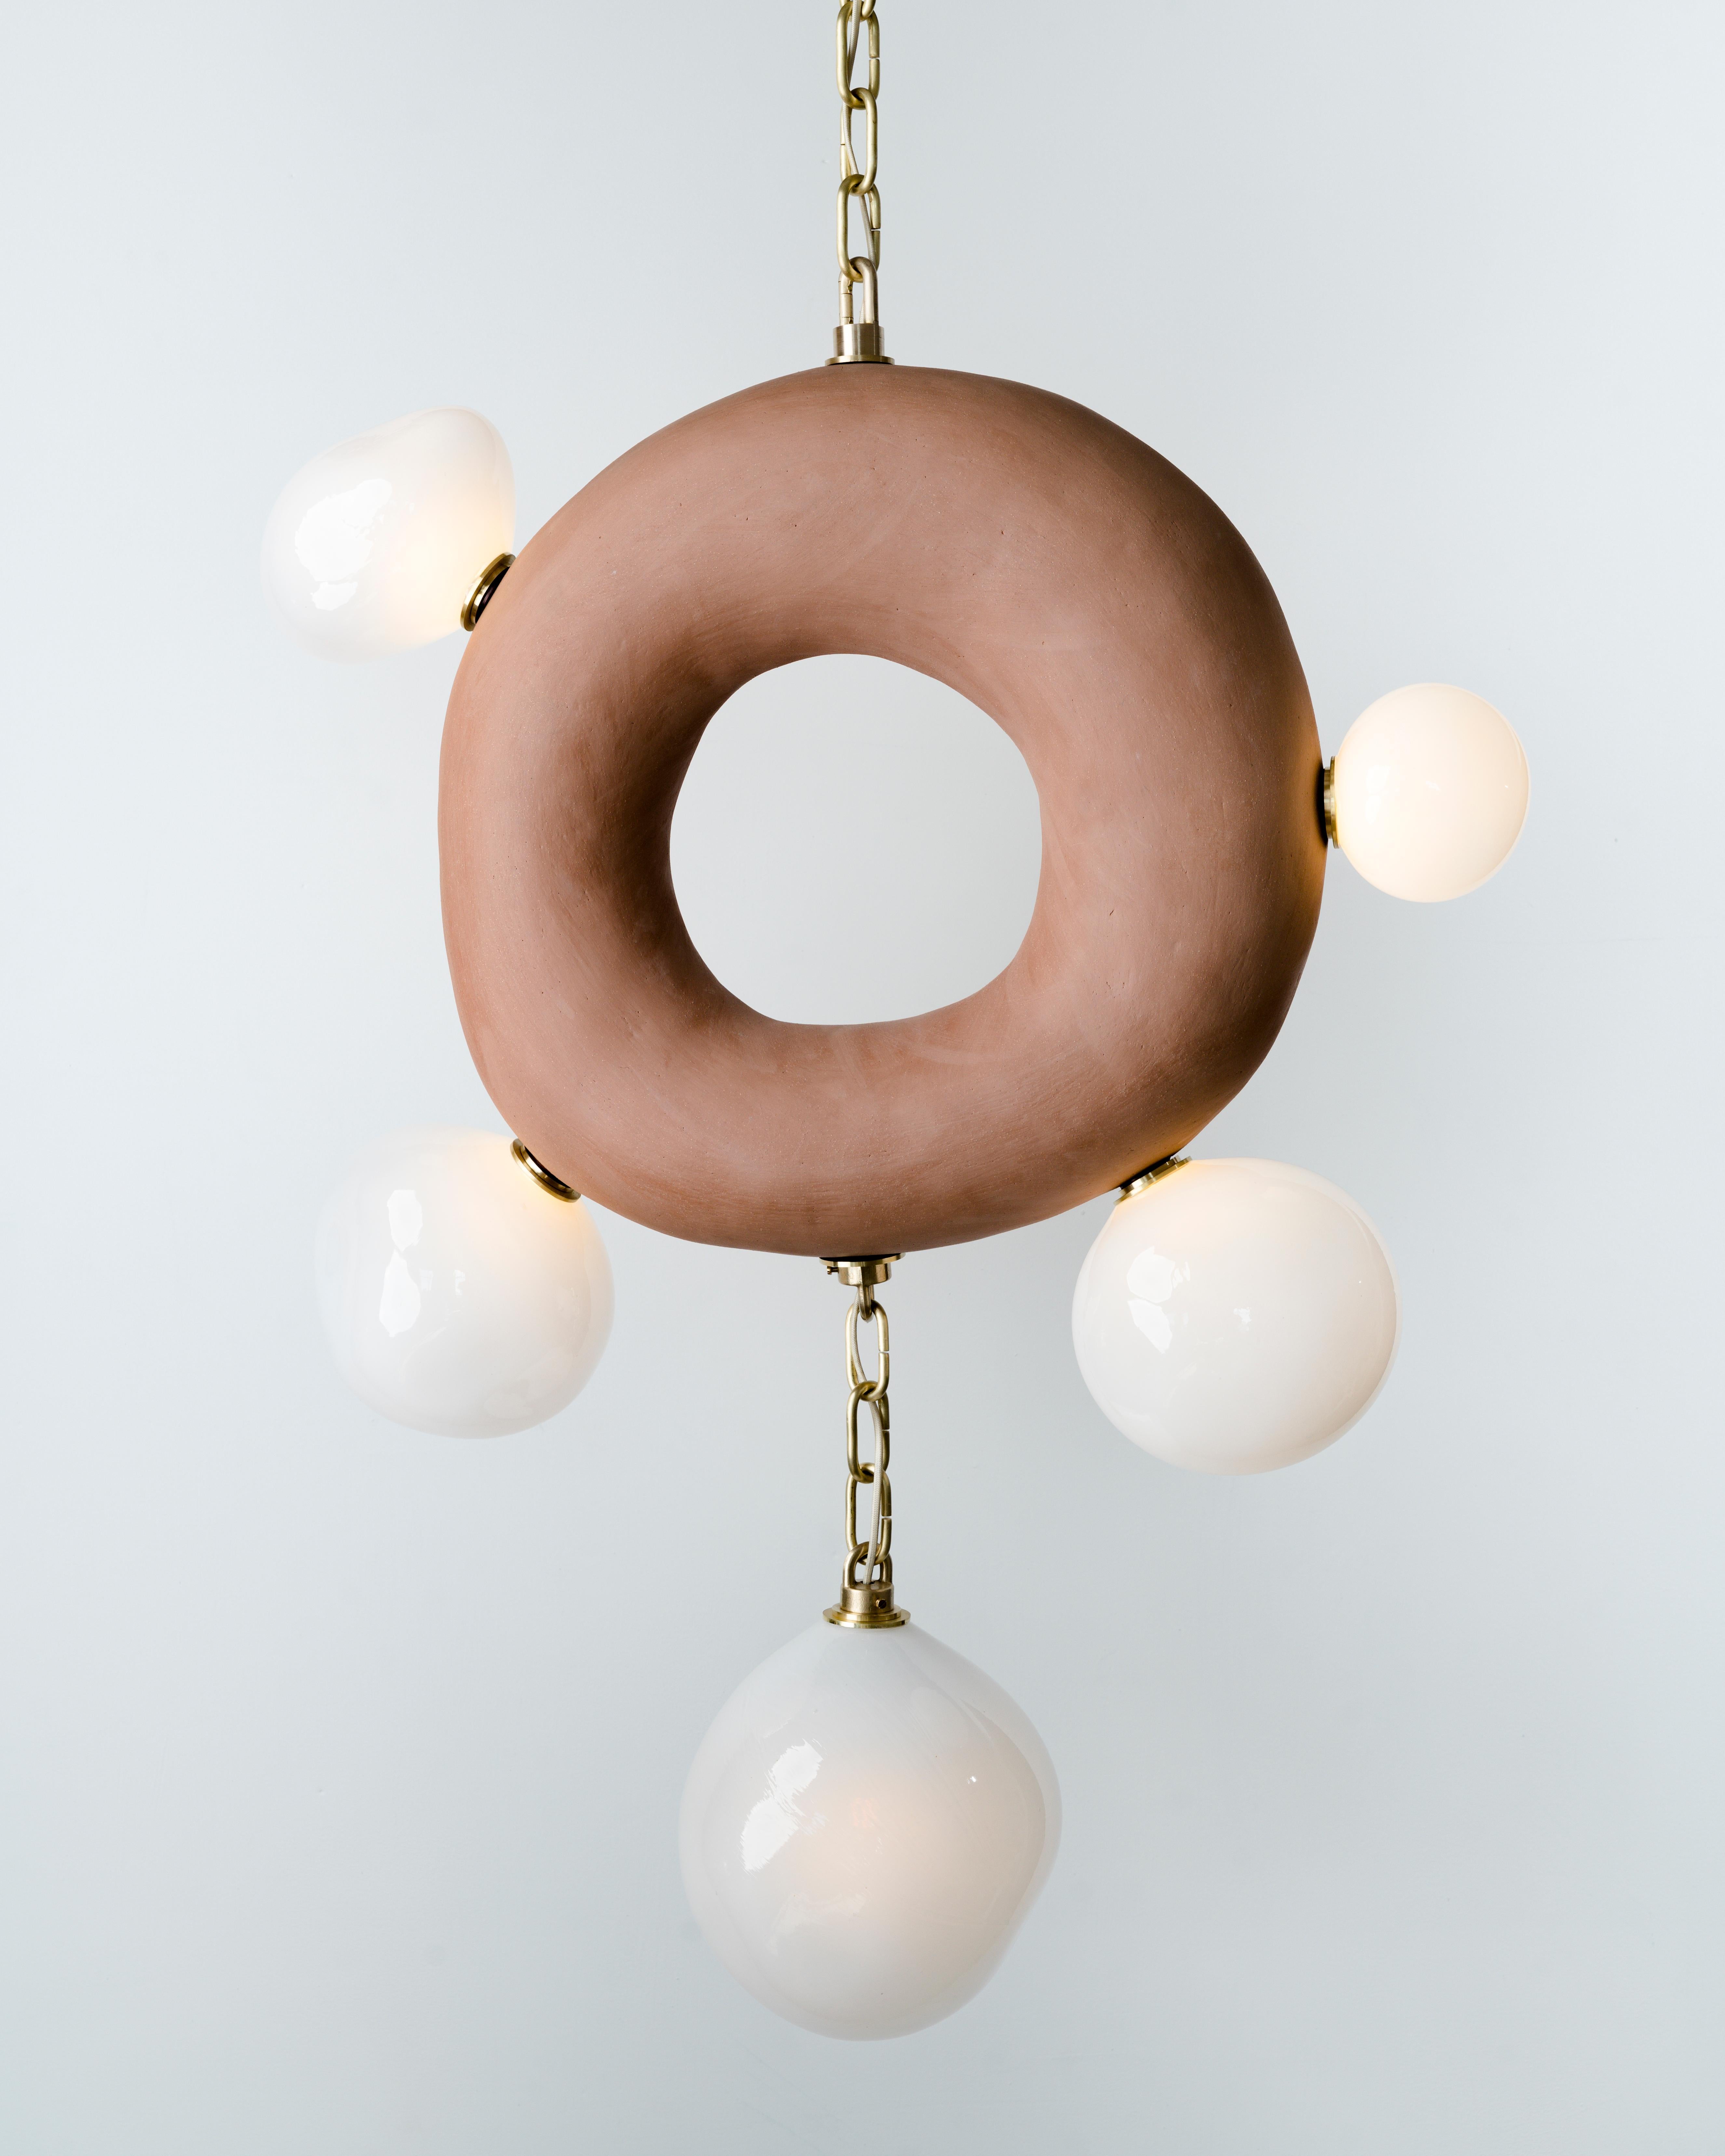 Objective Gallery are proud to debut Eny Lee Parker’s new collectible lighting at design Miami 2021.

Parker looks to our Neolithic past with her work taking inspiration from both prehistoric jewelry and architectural elements. Parker was once